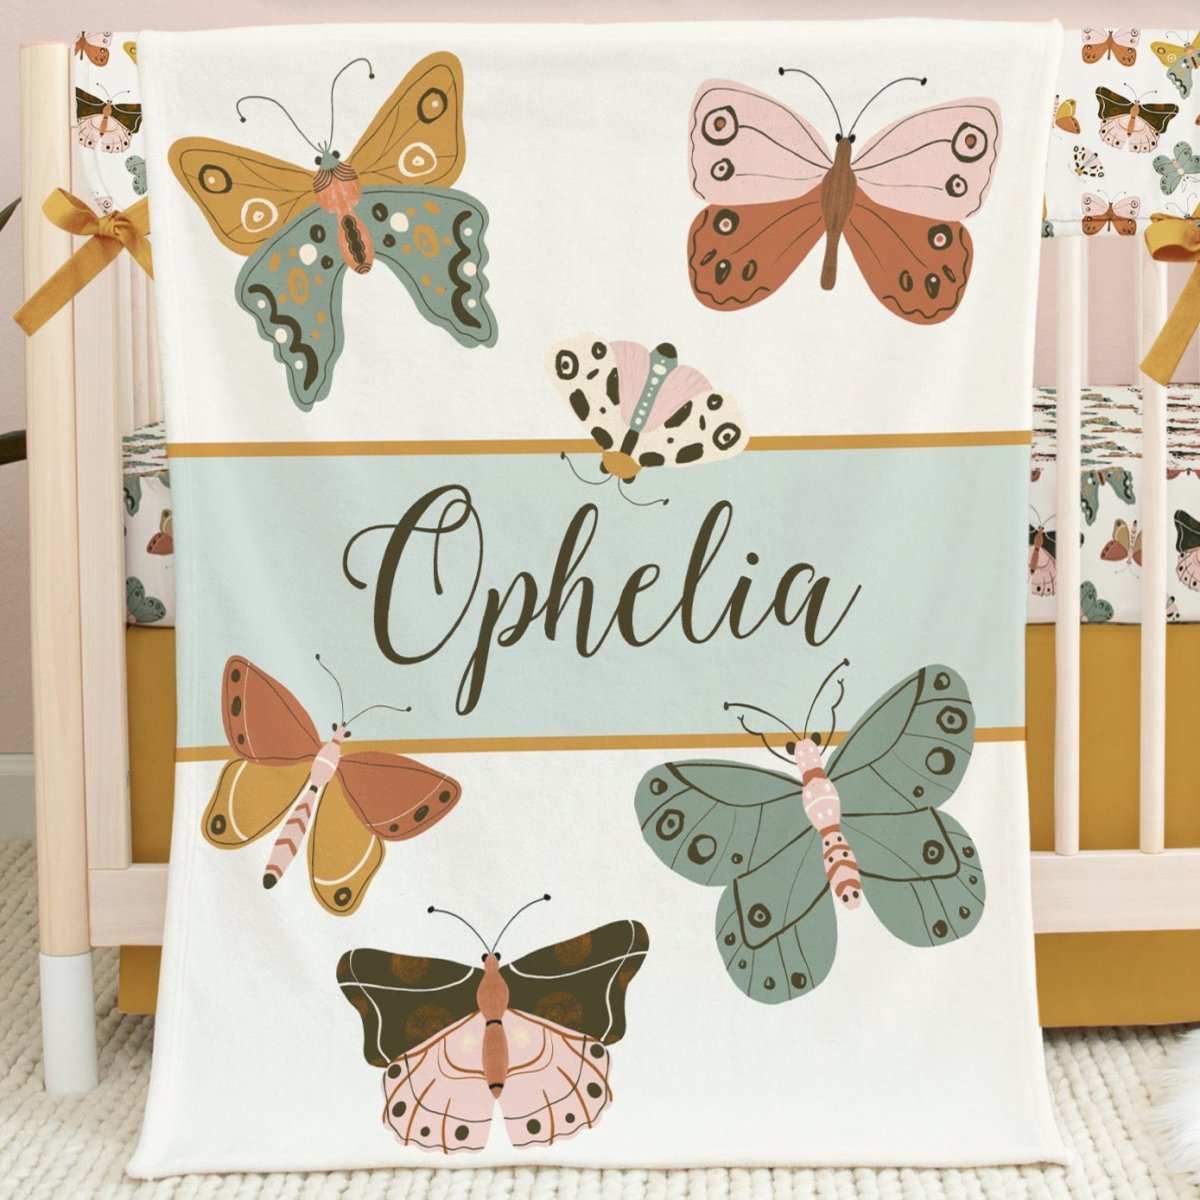 Vintage Butterfly Personalized Minky Blanket - gender_girl, Personalized_Yes, text